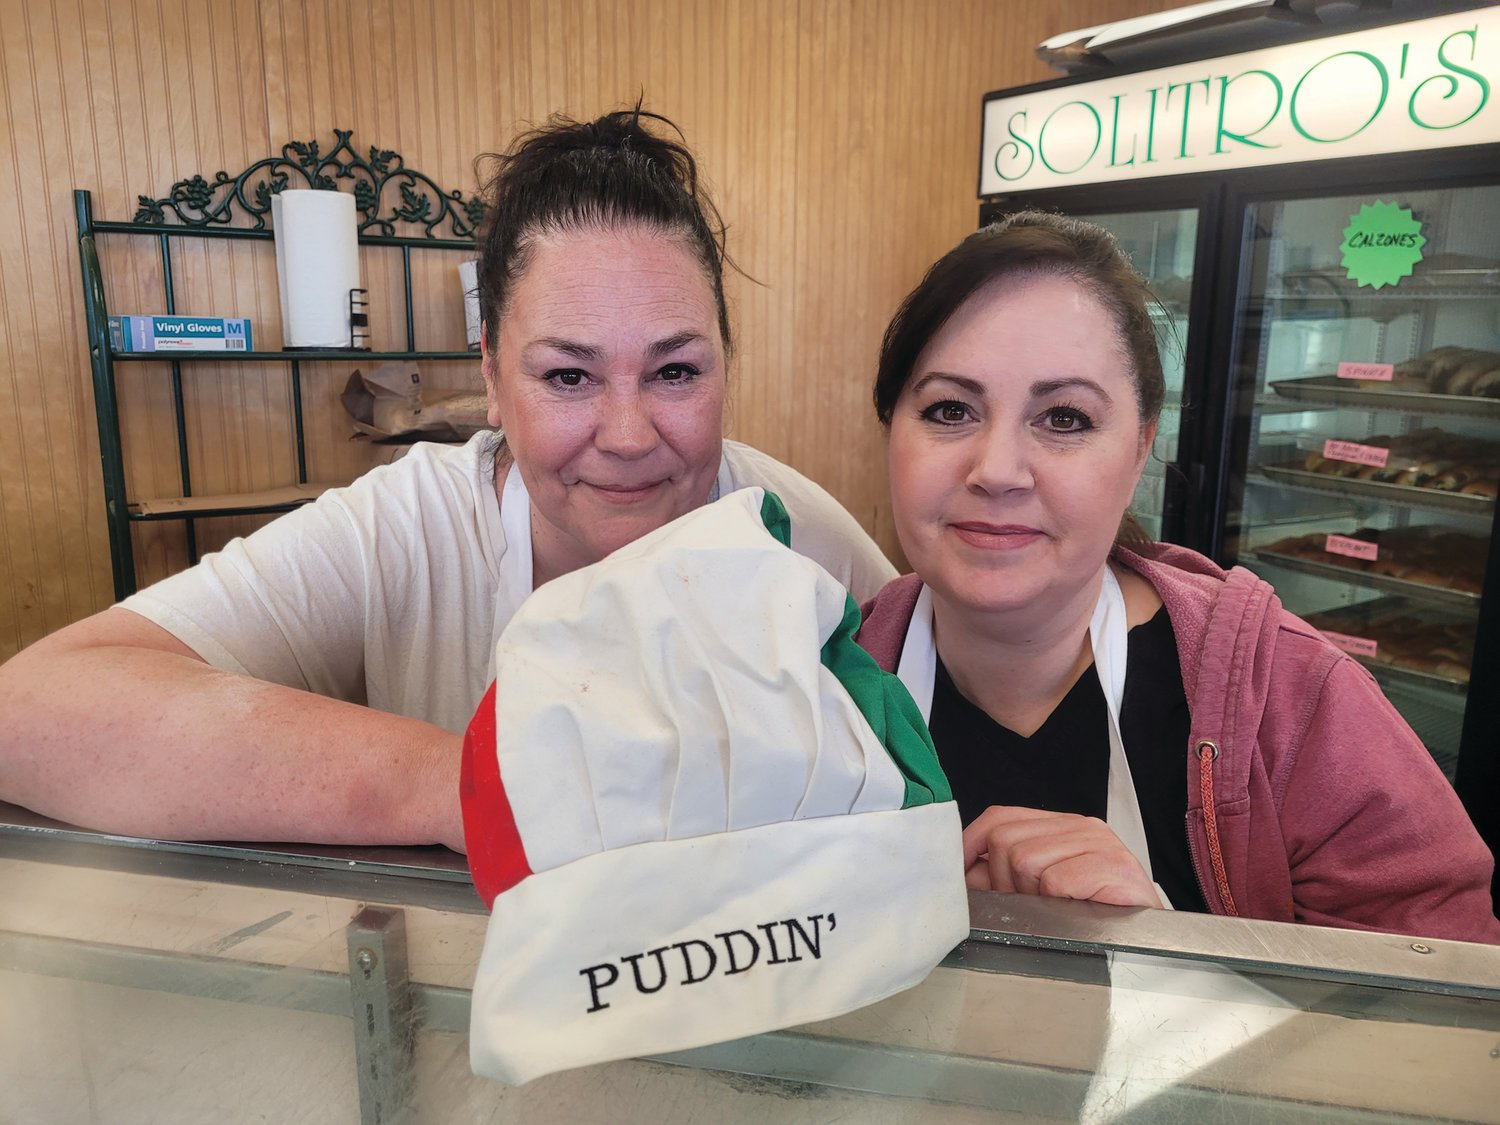 BIG HAT TO FILL: Current owner of Solitro’s Bakery, Elena Pennacchini, and her sister, Diane Notarianni, pose for a photo with their late father’s “PUDDIN’ Hat.”